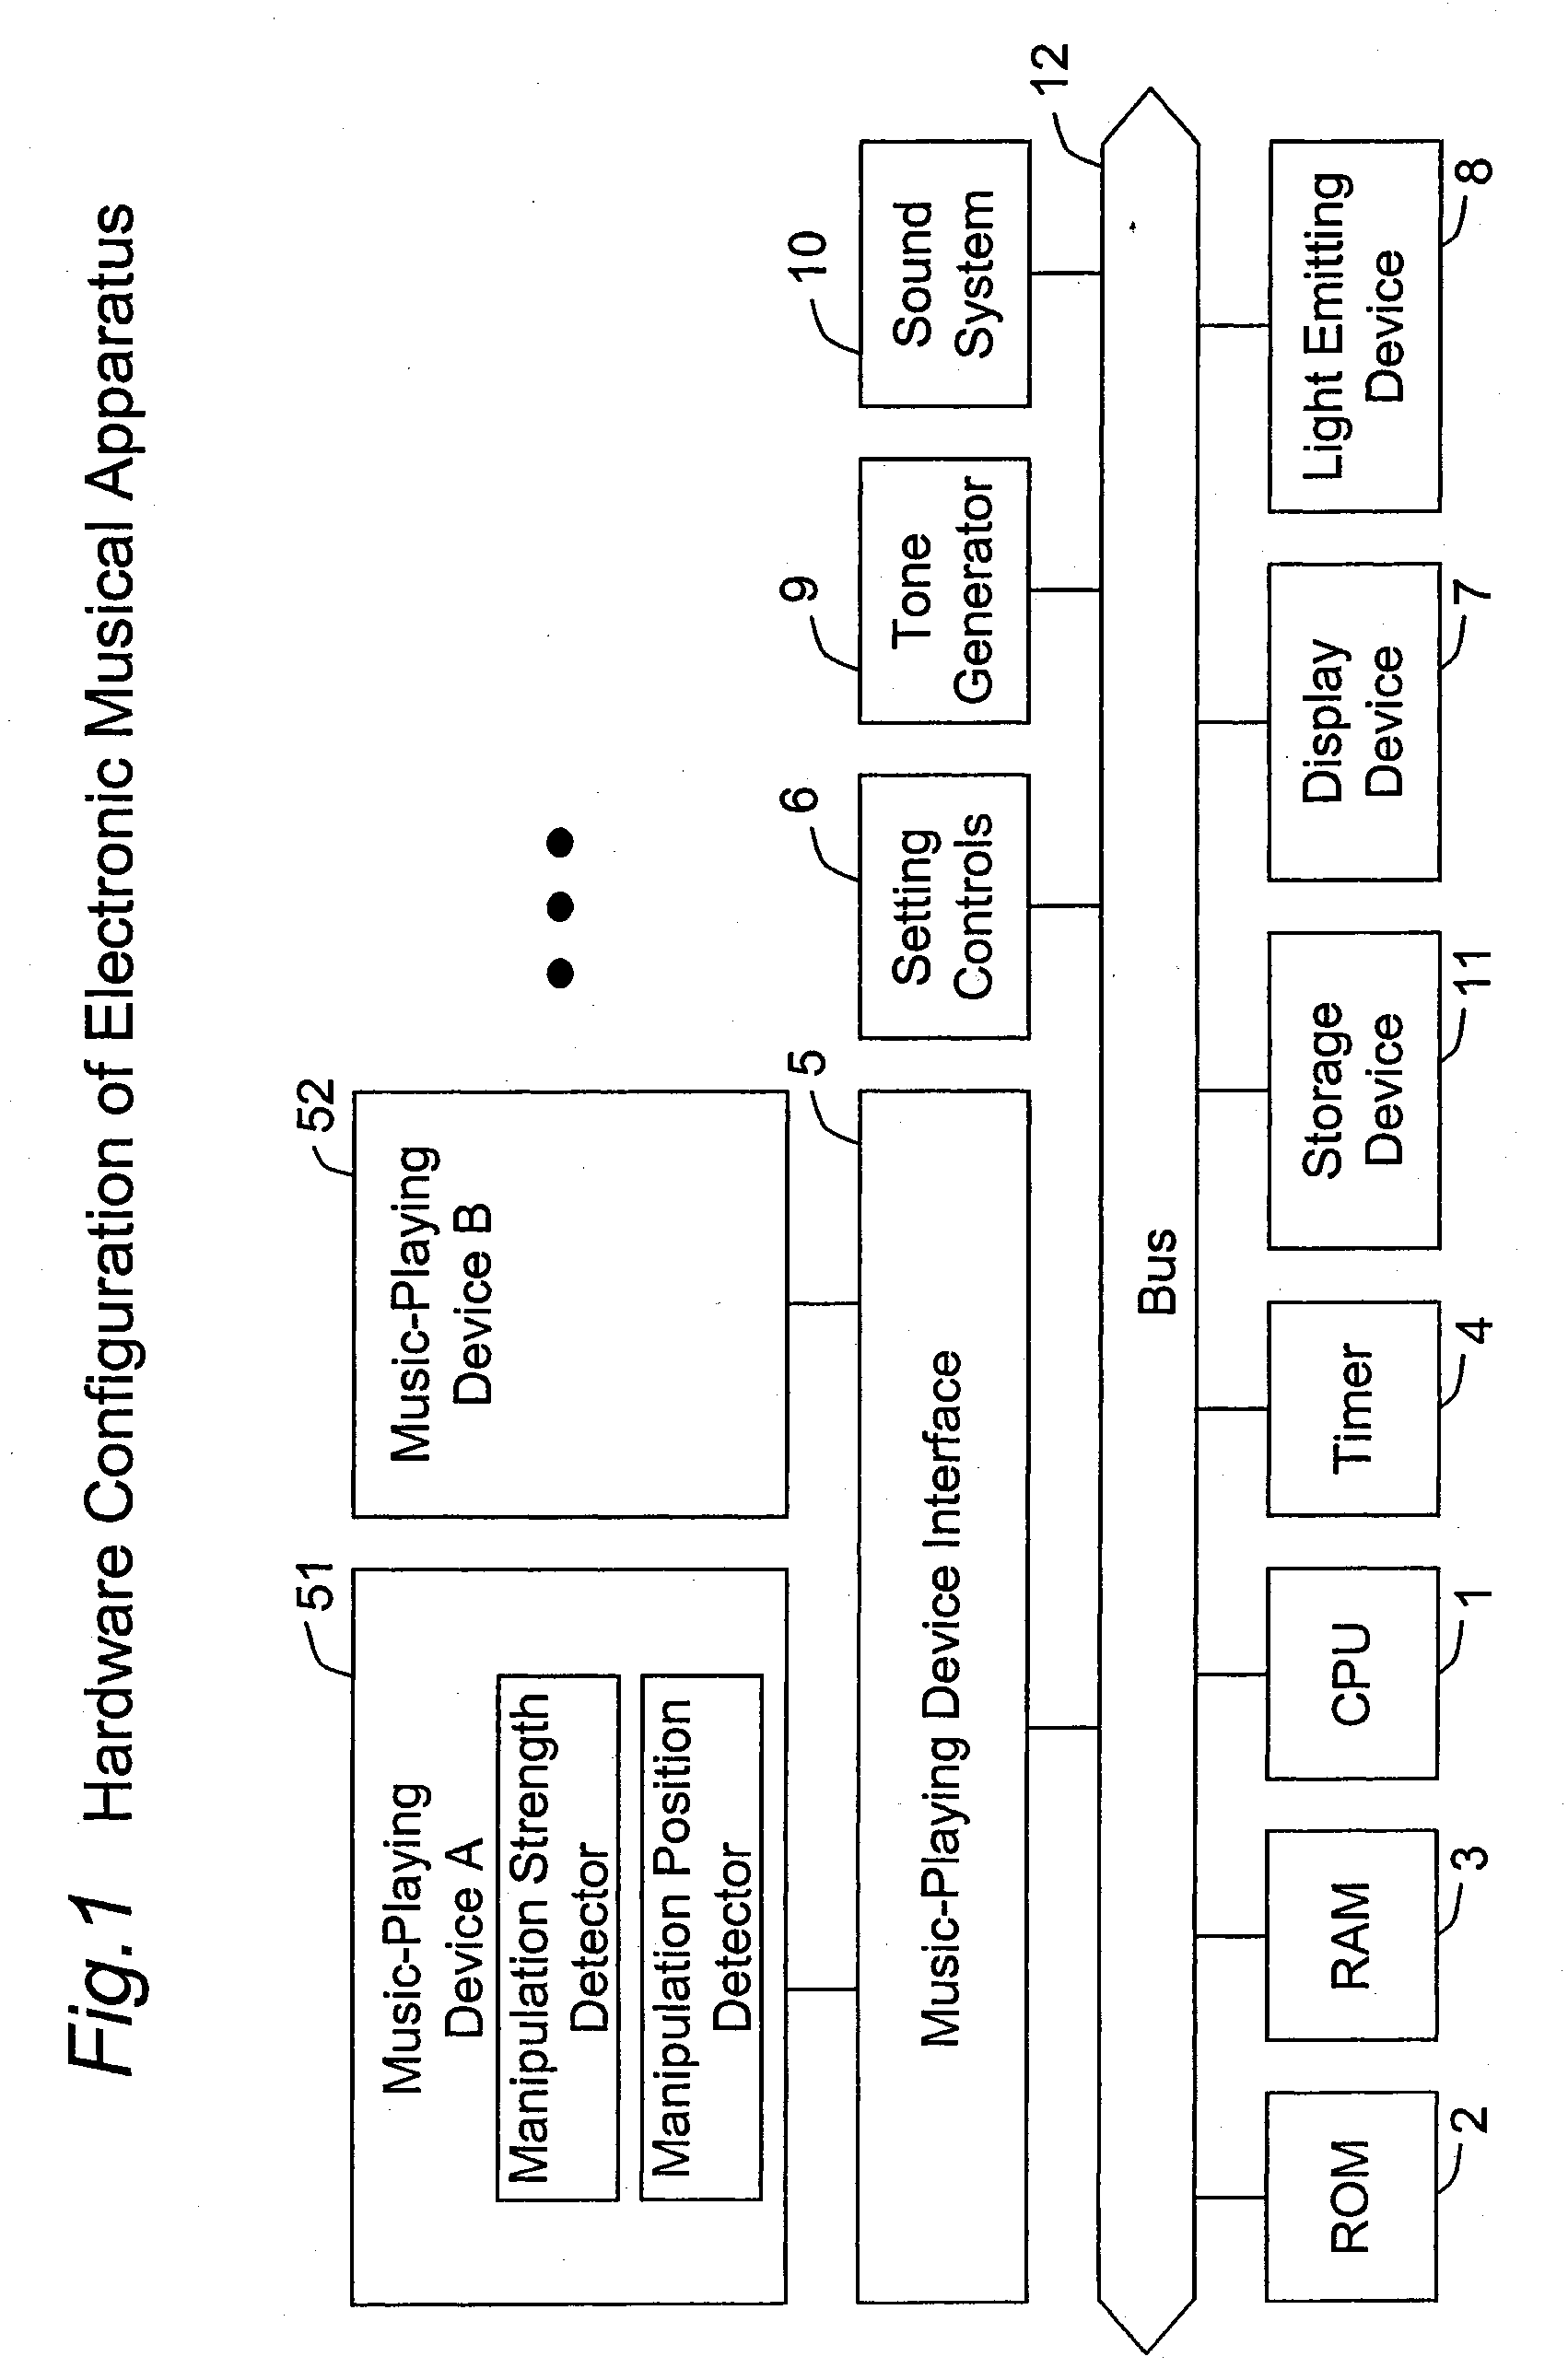 Electronic musical apparatus for training in timing correctly